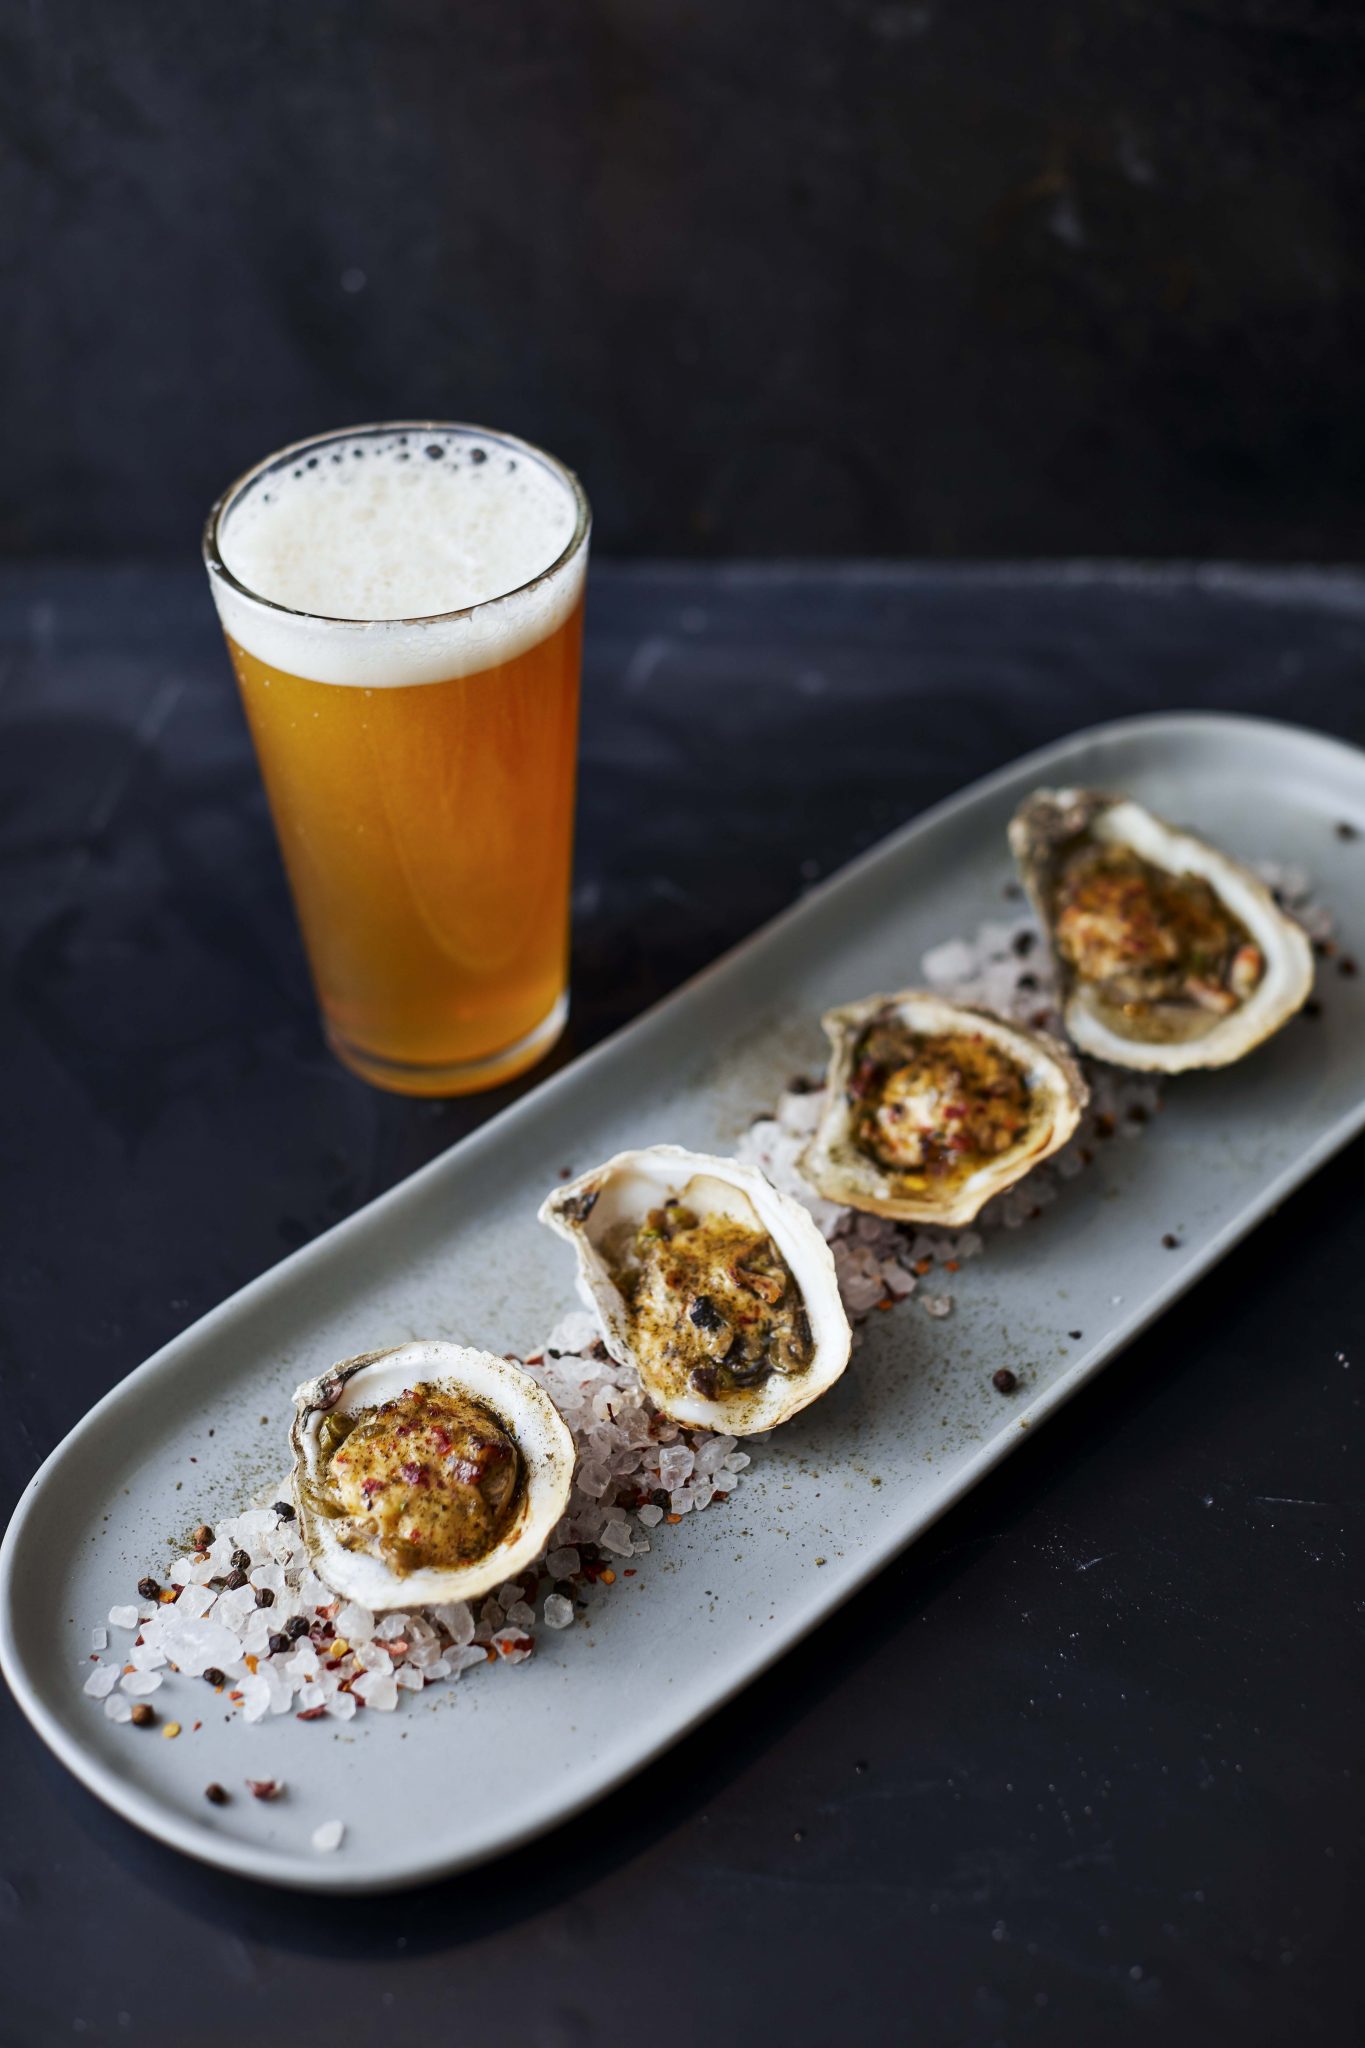 Oysters & Beer from Makeready L&L